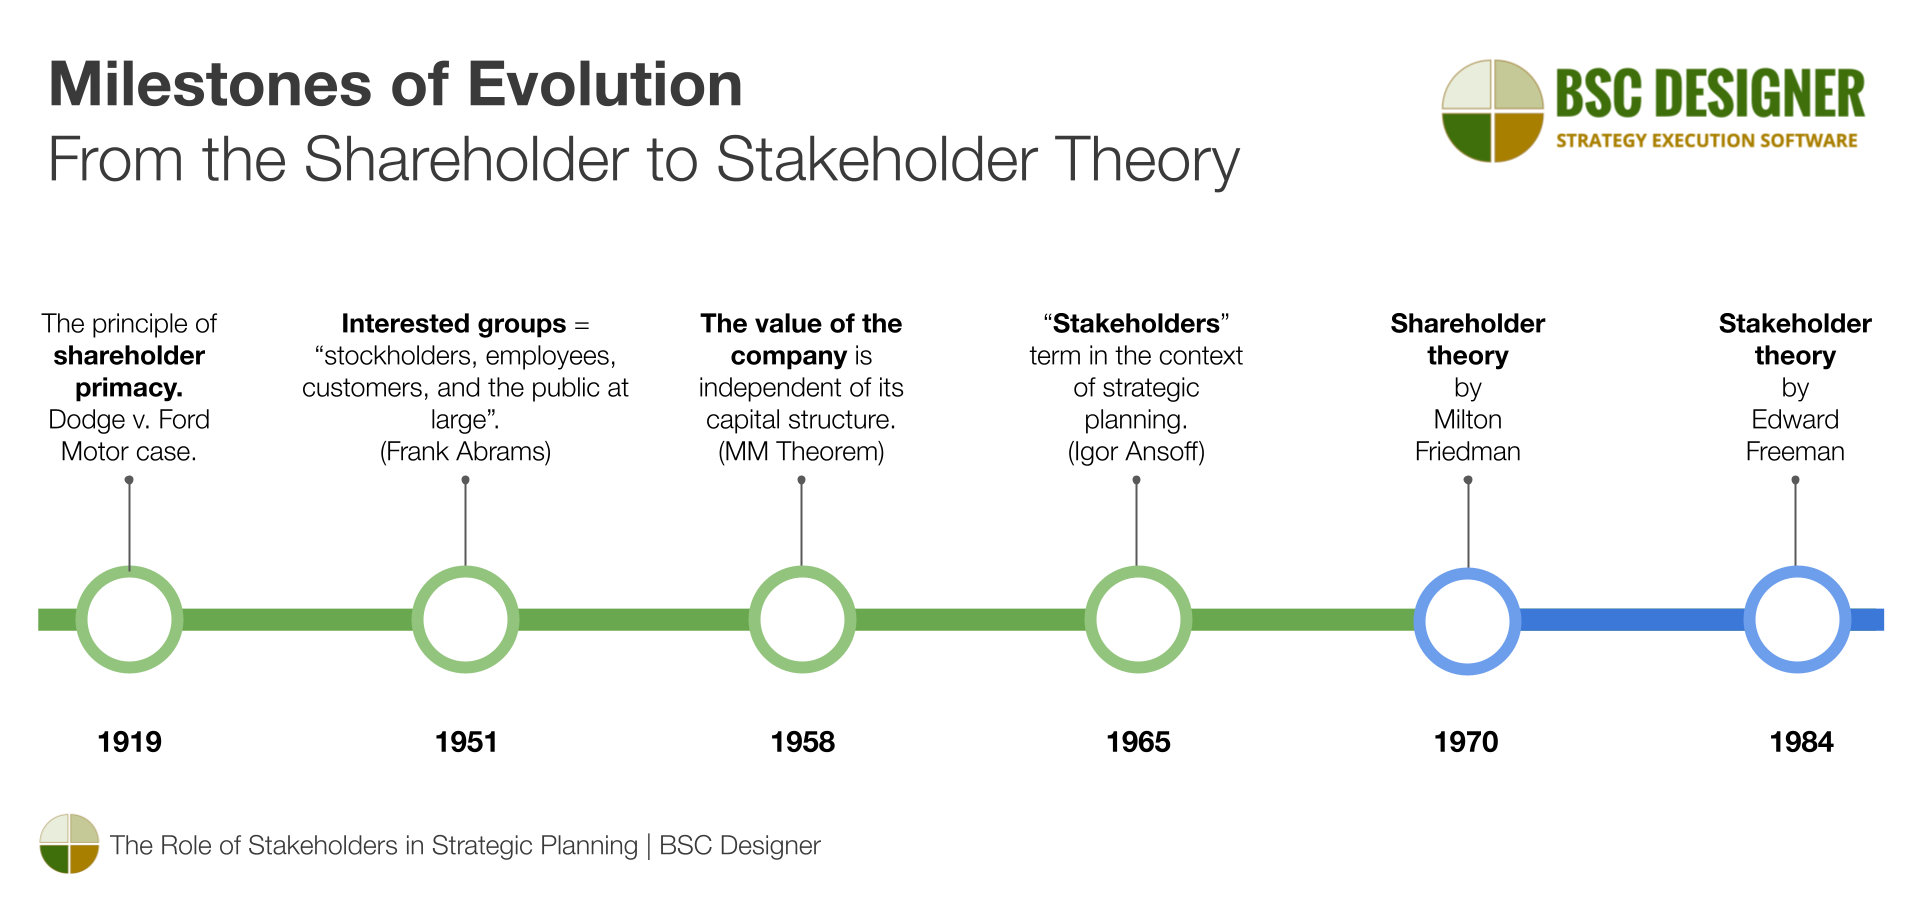 Milestones of Evolution from the Shareholder to Stakeholder Theory